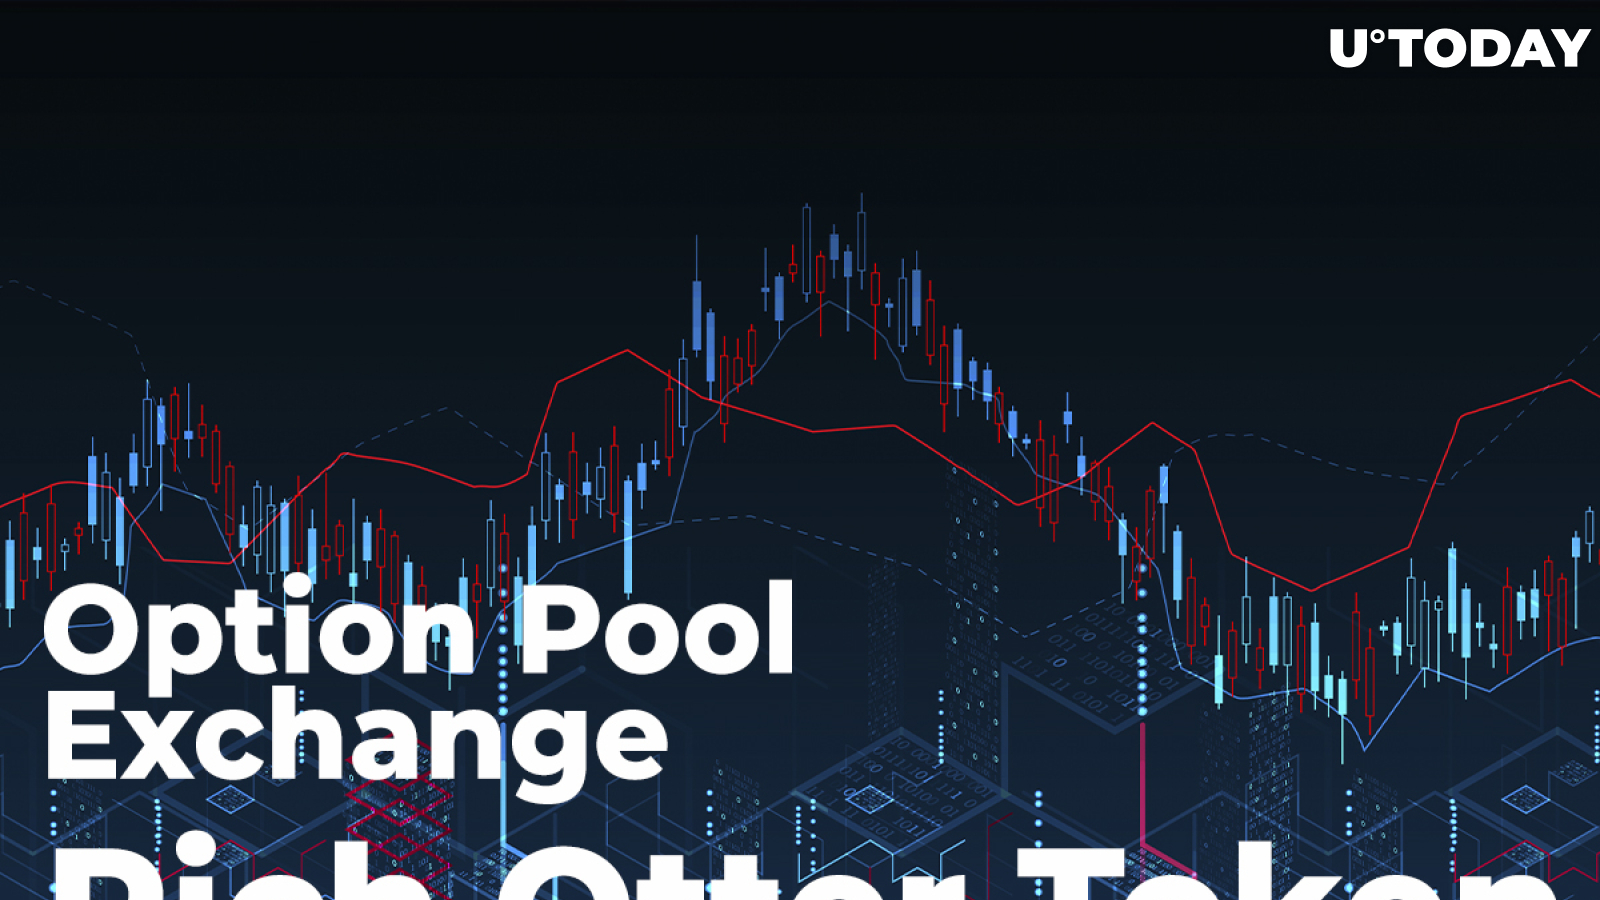 Option Pool Exchange Releases Tokenized Insurance Fund with Rich Otter Token